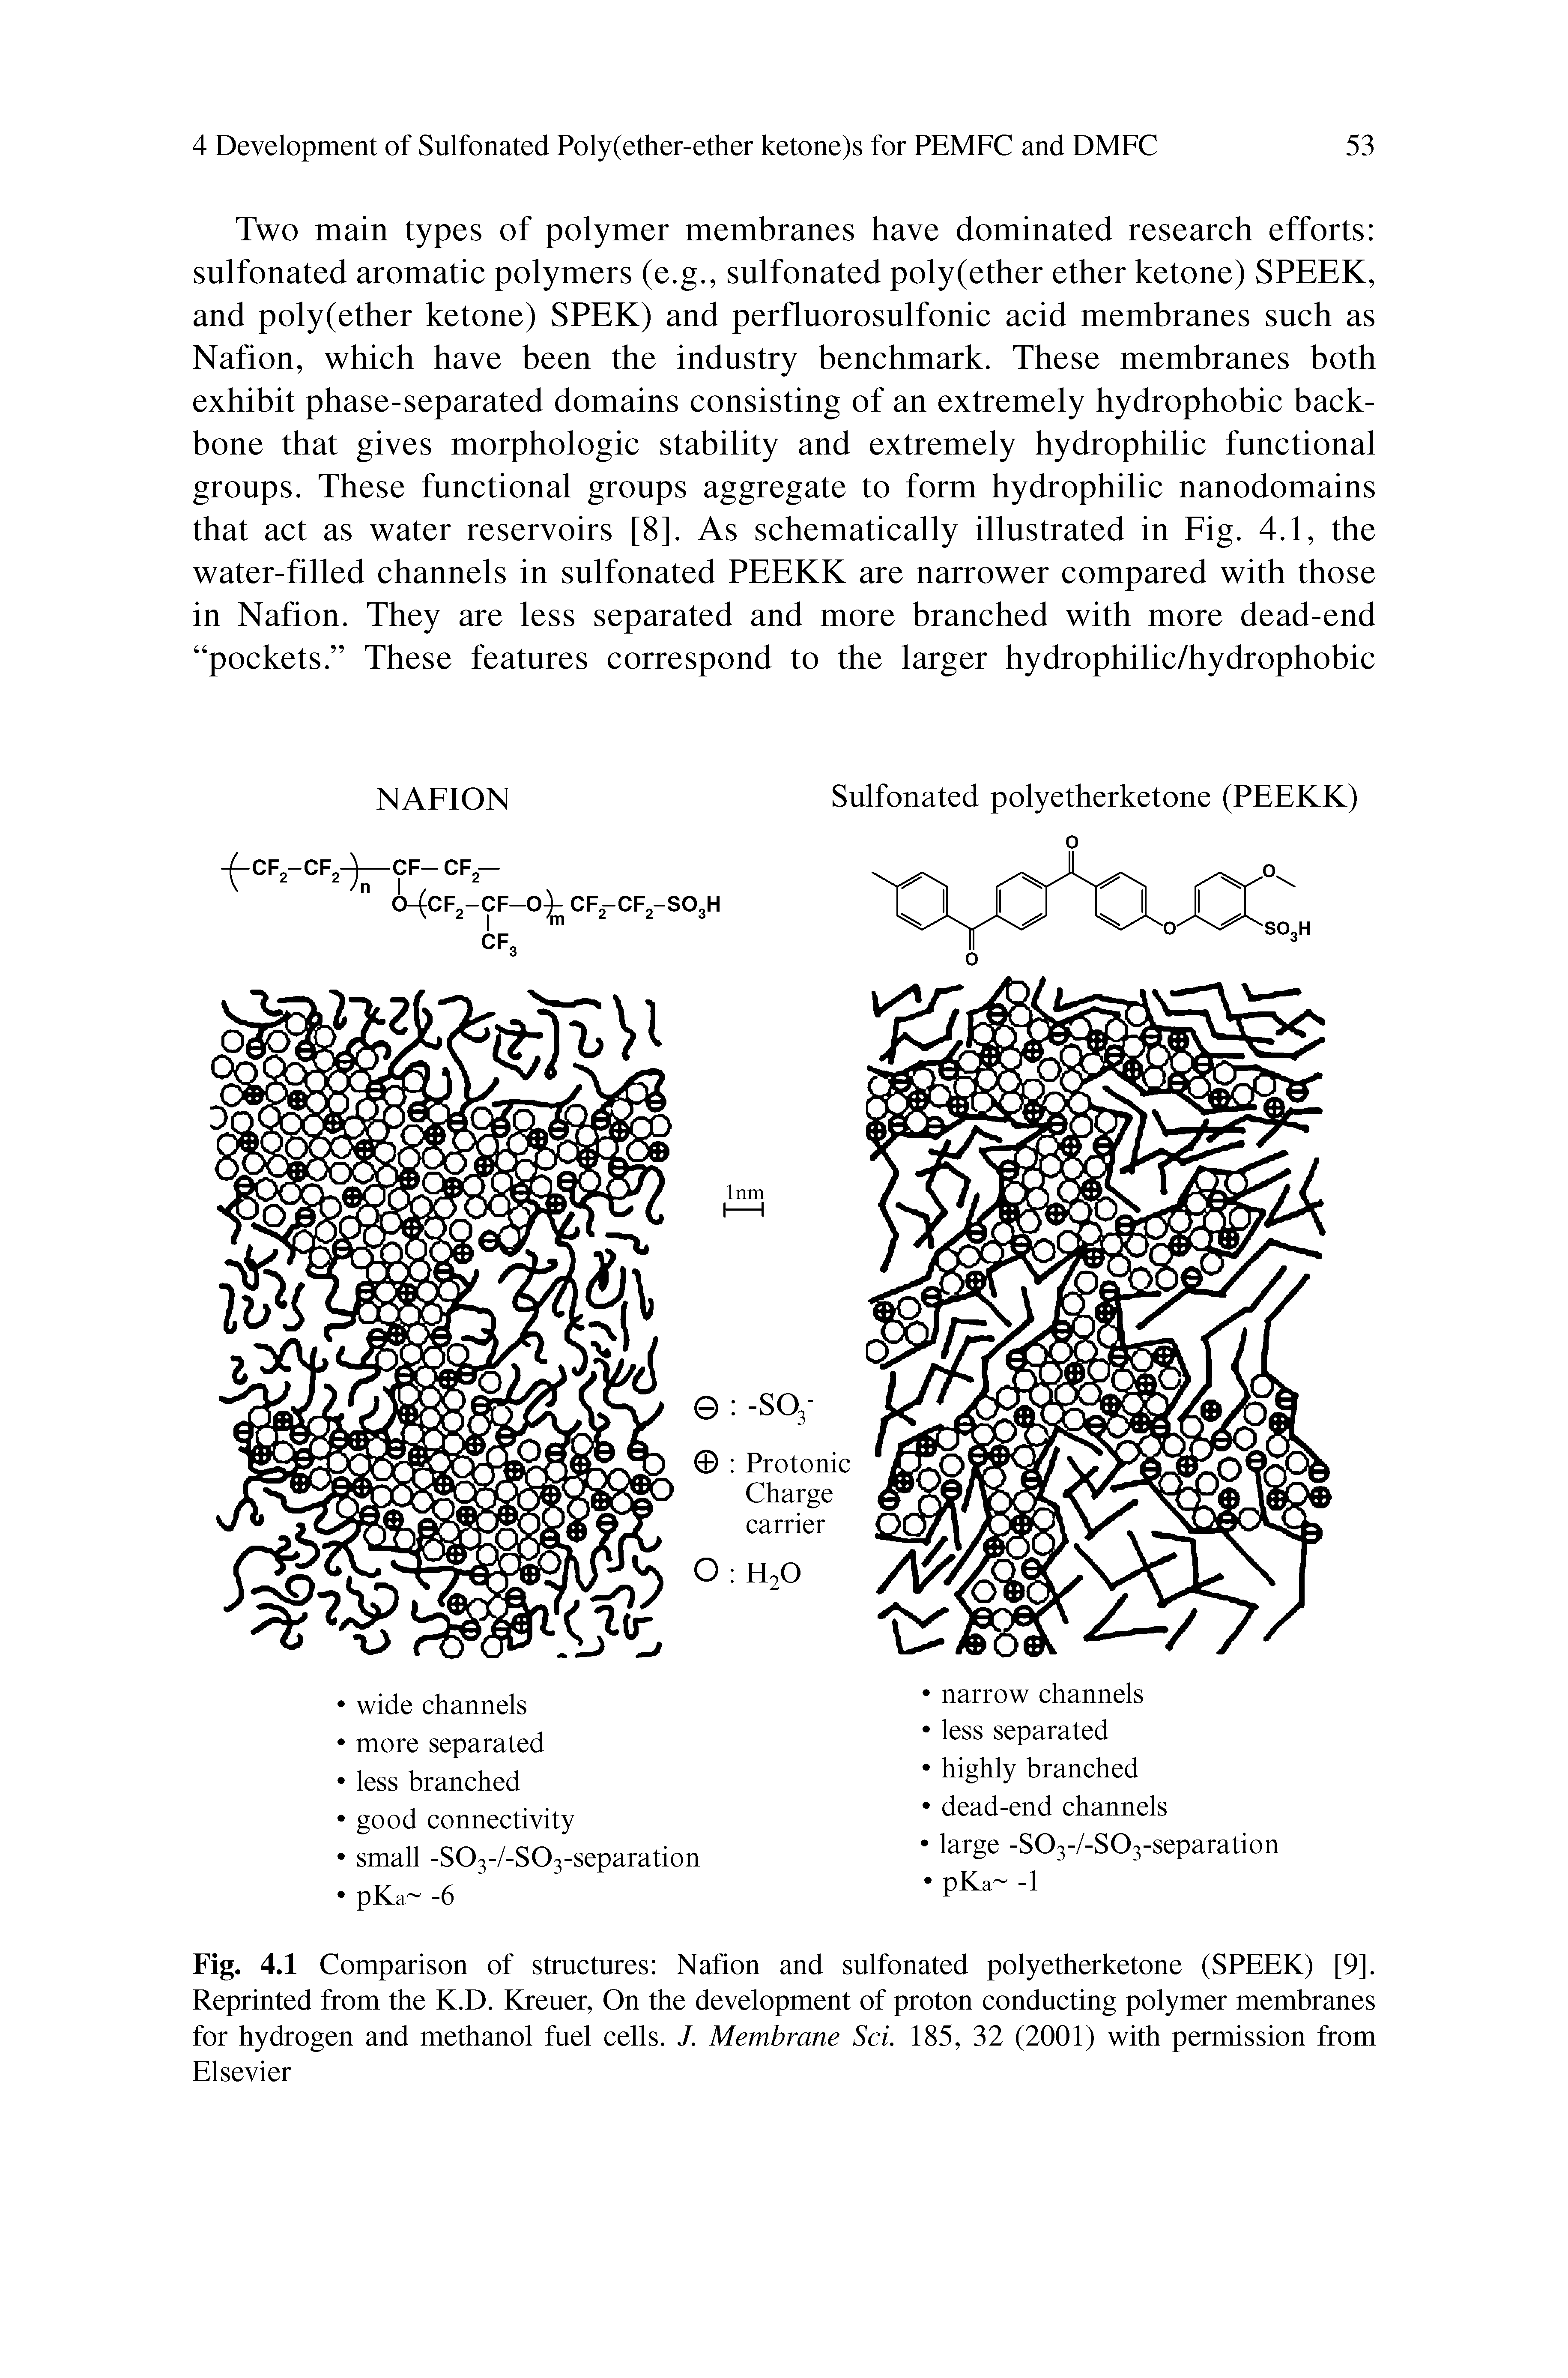 Fig. 4.1 Comparison of structures Nafion and sulfonated polyetherketone (SPEEK) [9]. Reprinted from the K.D. Kreuer, On the development of proton conducting polymer membranes for hydrogen and methanol fuel cells. J. Membrane Sci. 185, 32 (2001) with permission from Elsevier...